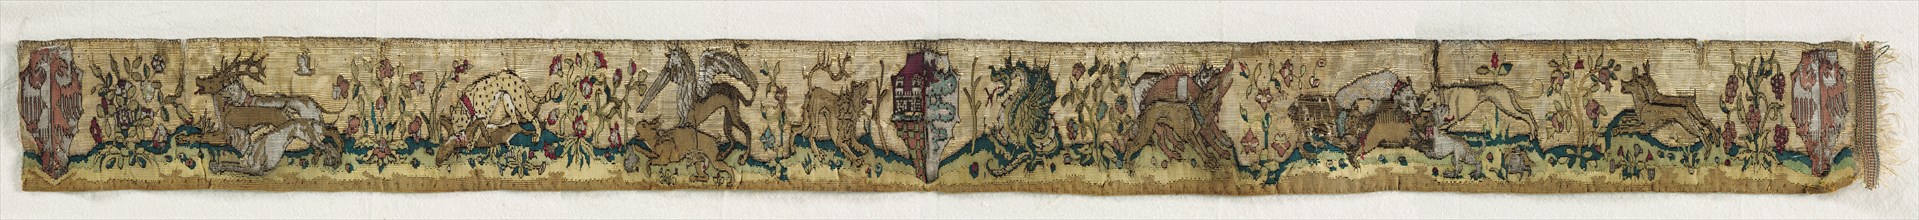 Tapestry Border, 1400-1450. Italy, Lombardy, Milan ?, first half of 15th century. Tapestry weave;